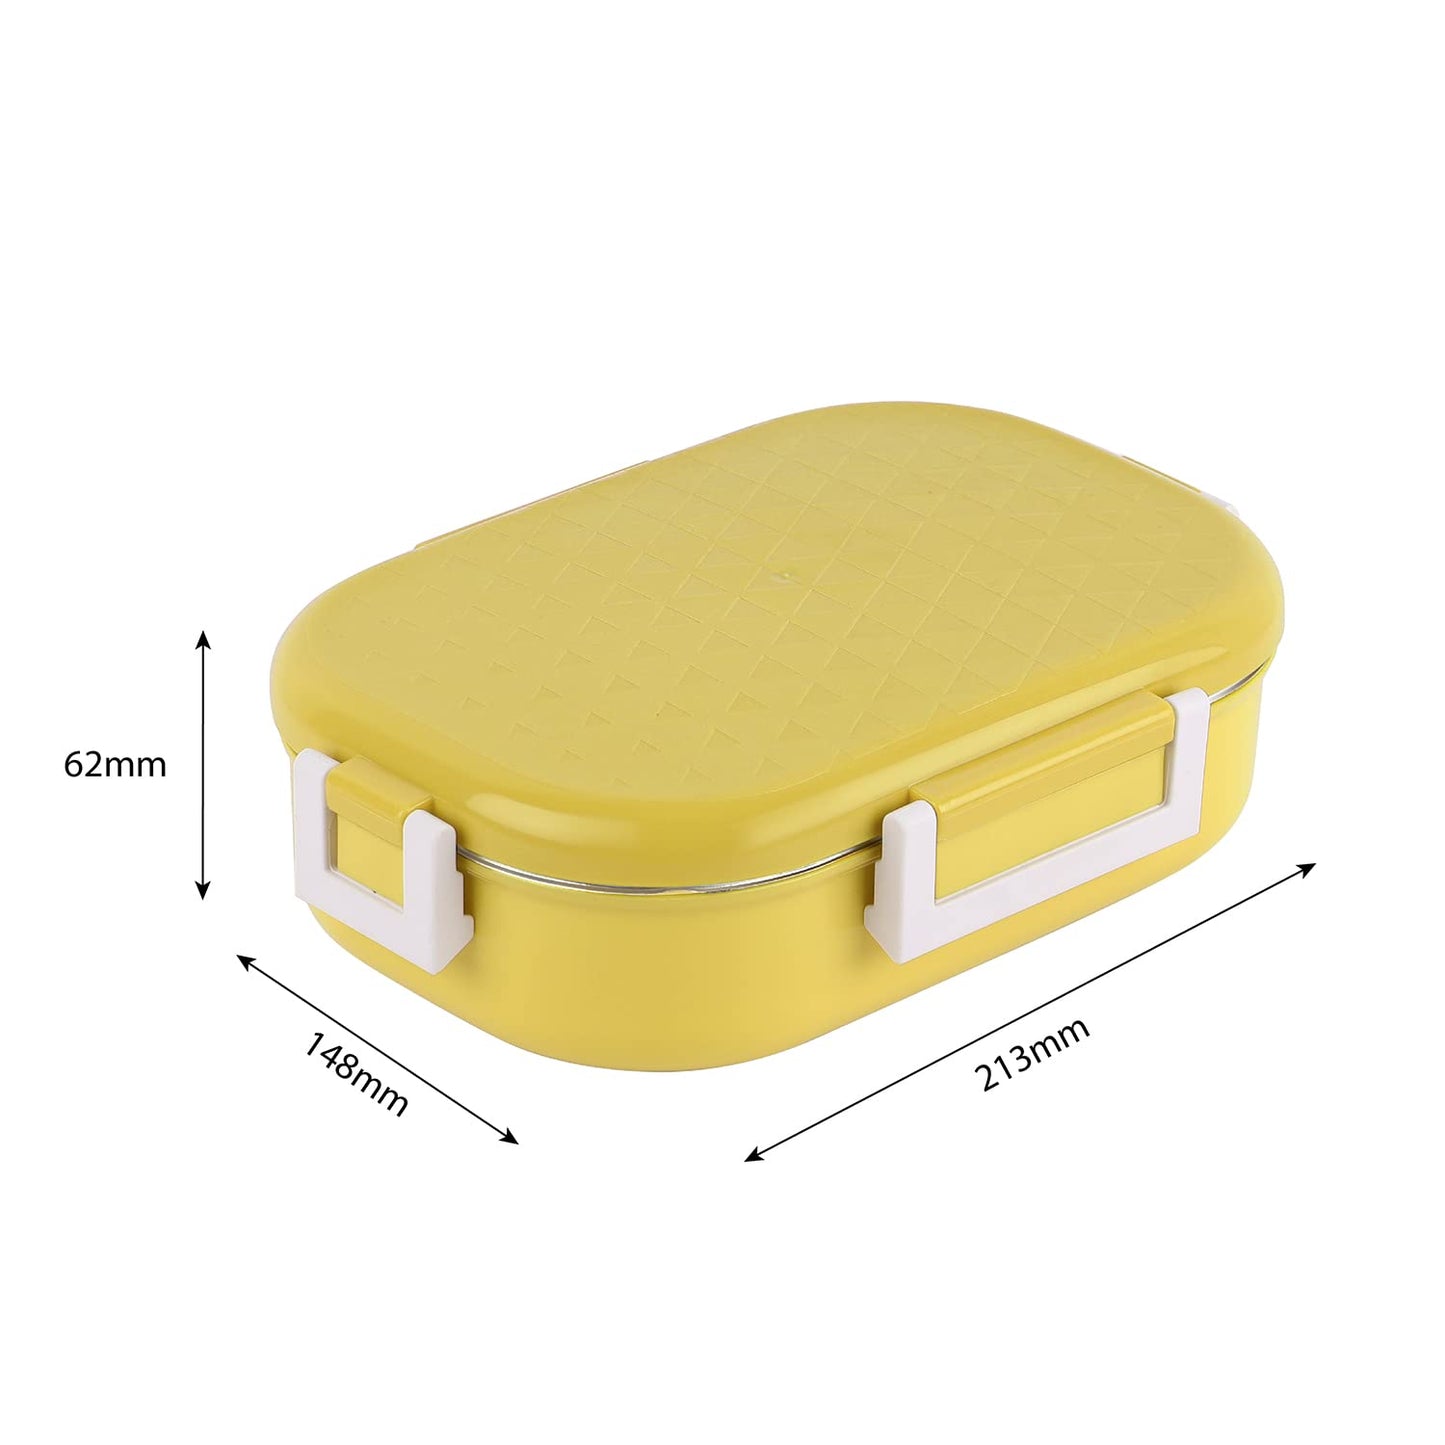 CELLO Altro Neo Lunch Box, Neo Yellow, 700ml | 2 Units Insulated Lunch Boxes |Stainless Steel Lunch Box for Kids | Leak-Proof Snacks Tiffin Box for School